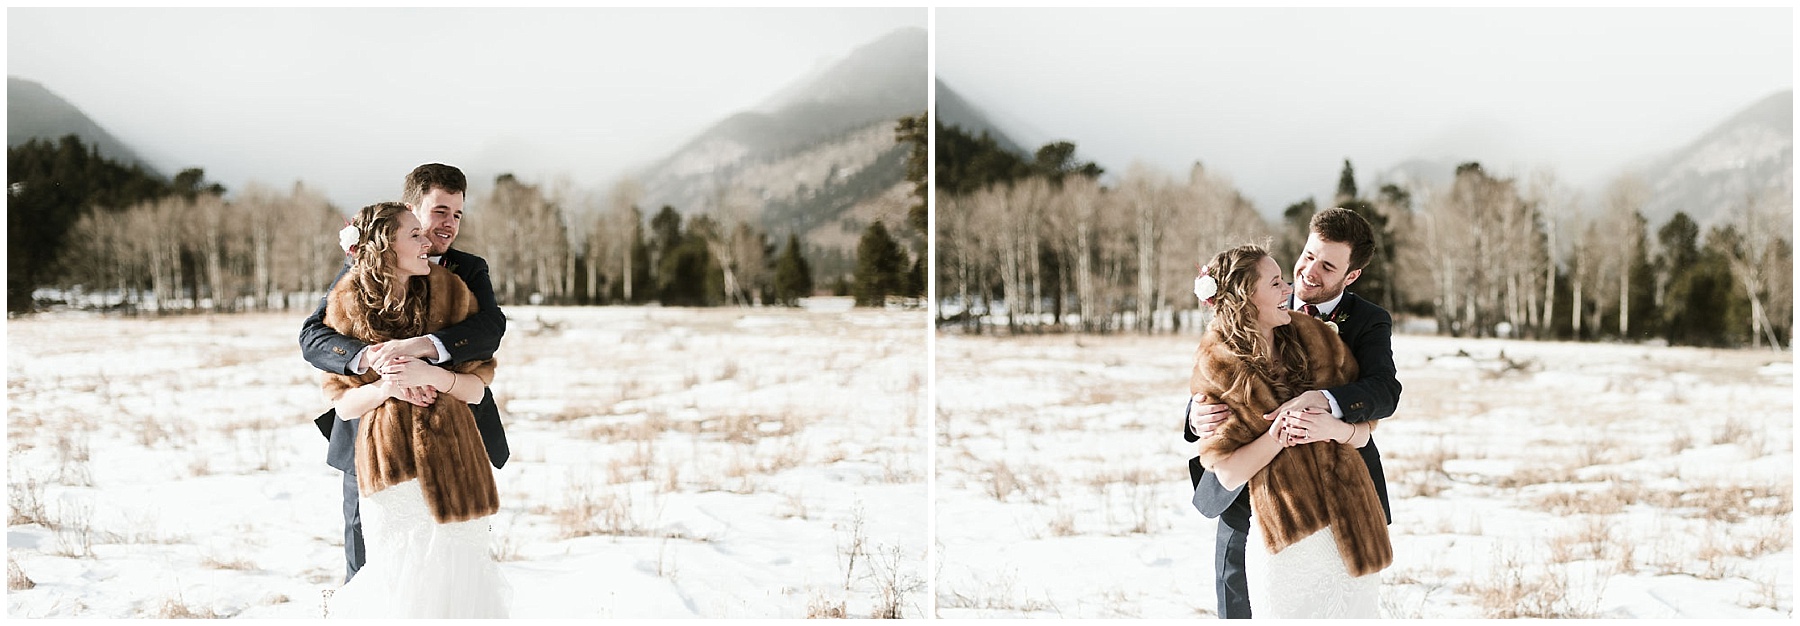 Katesalleyphotography-112_Haley and Dan get married in Estes Park.jpg